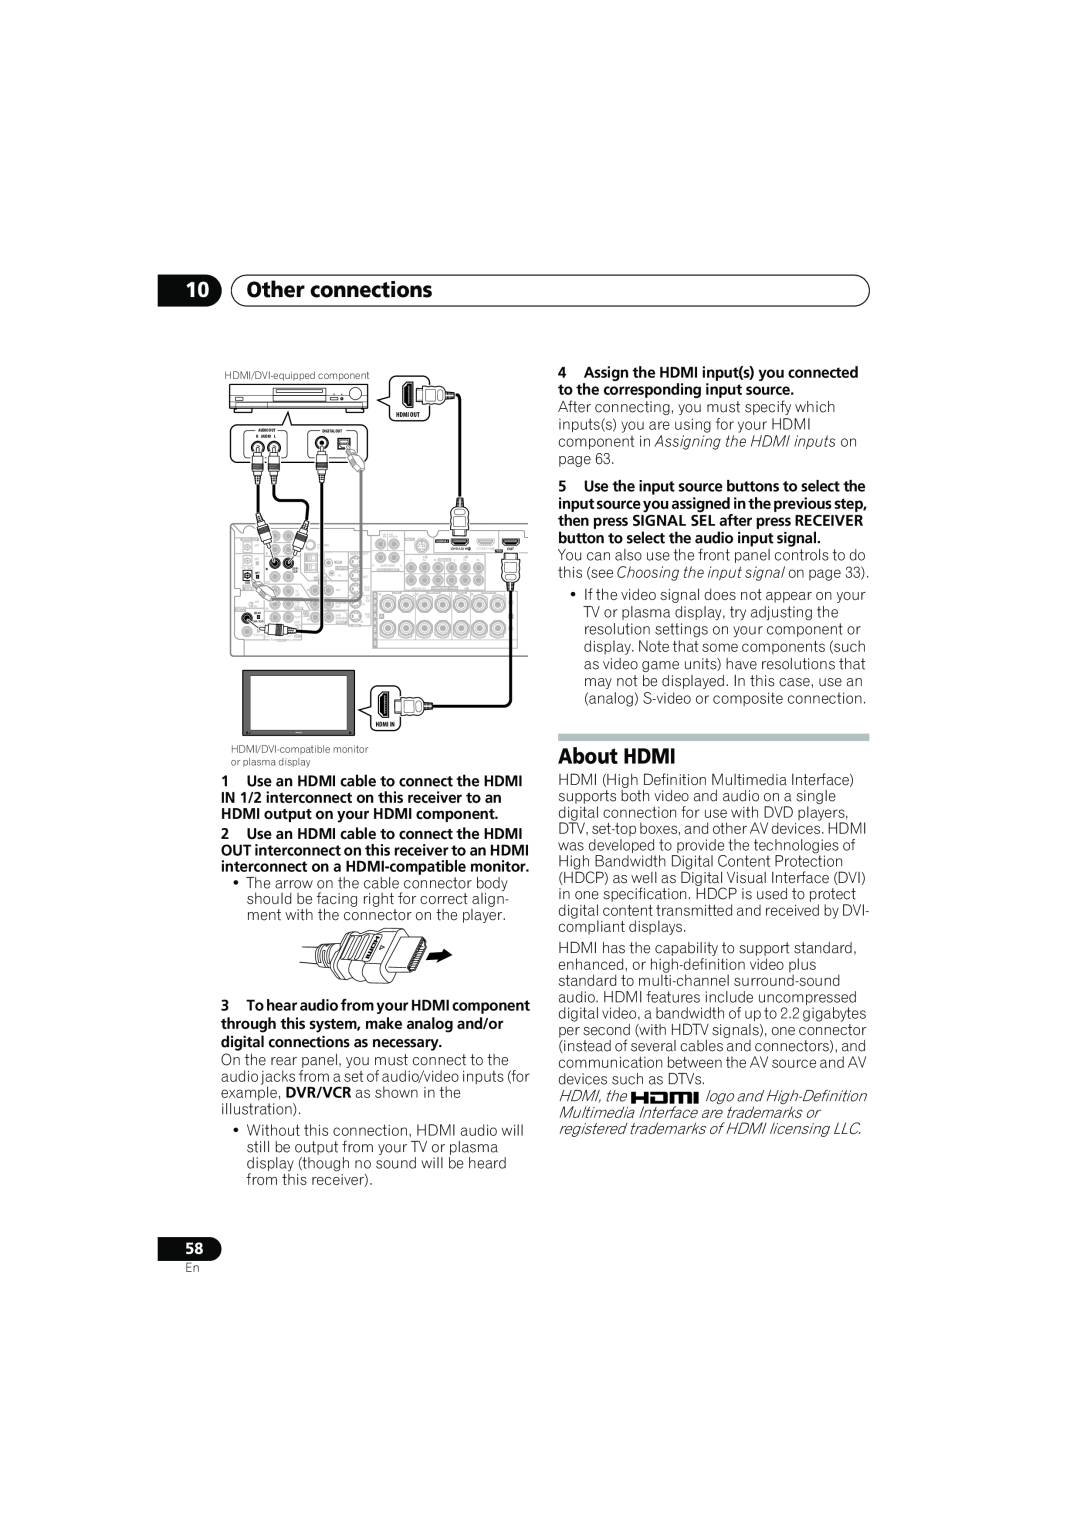 Pioneer VSX-917V manual About HDMI, component in Assigning the HDMI inputs on, 10Other connections 